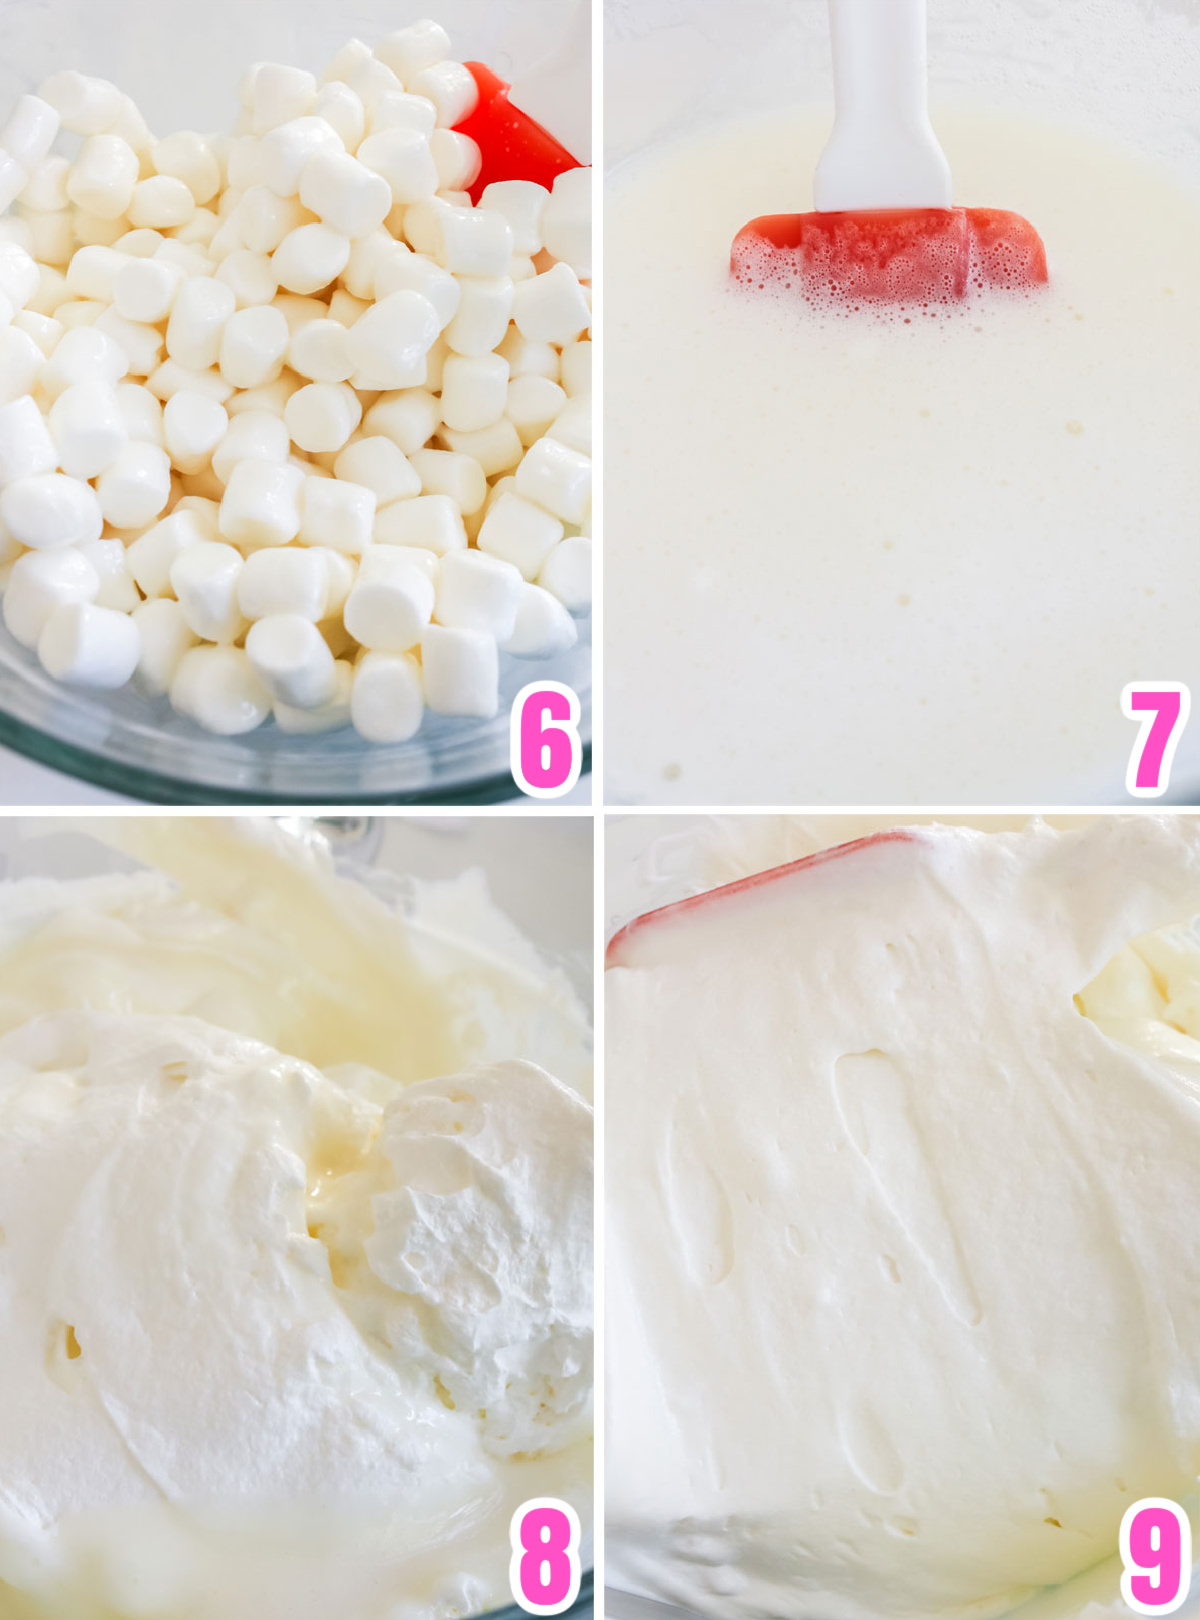 Collage image showing the steps for making the Marshmallow Filling for the S'more Pie.